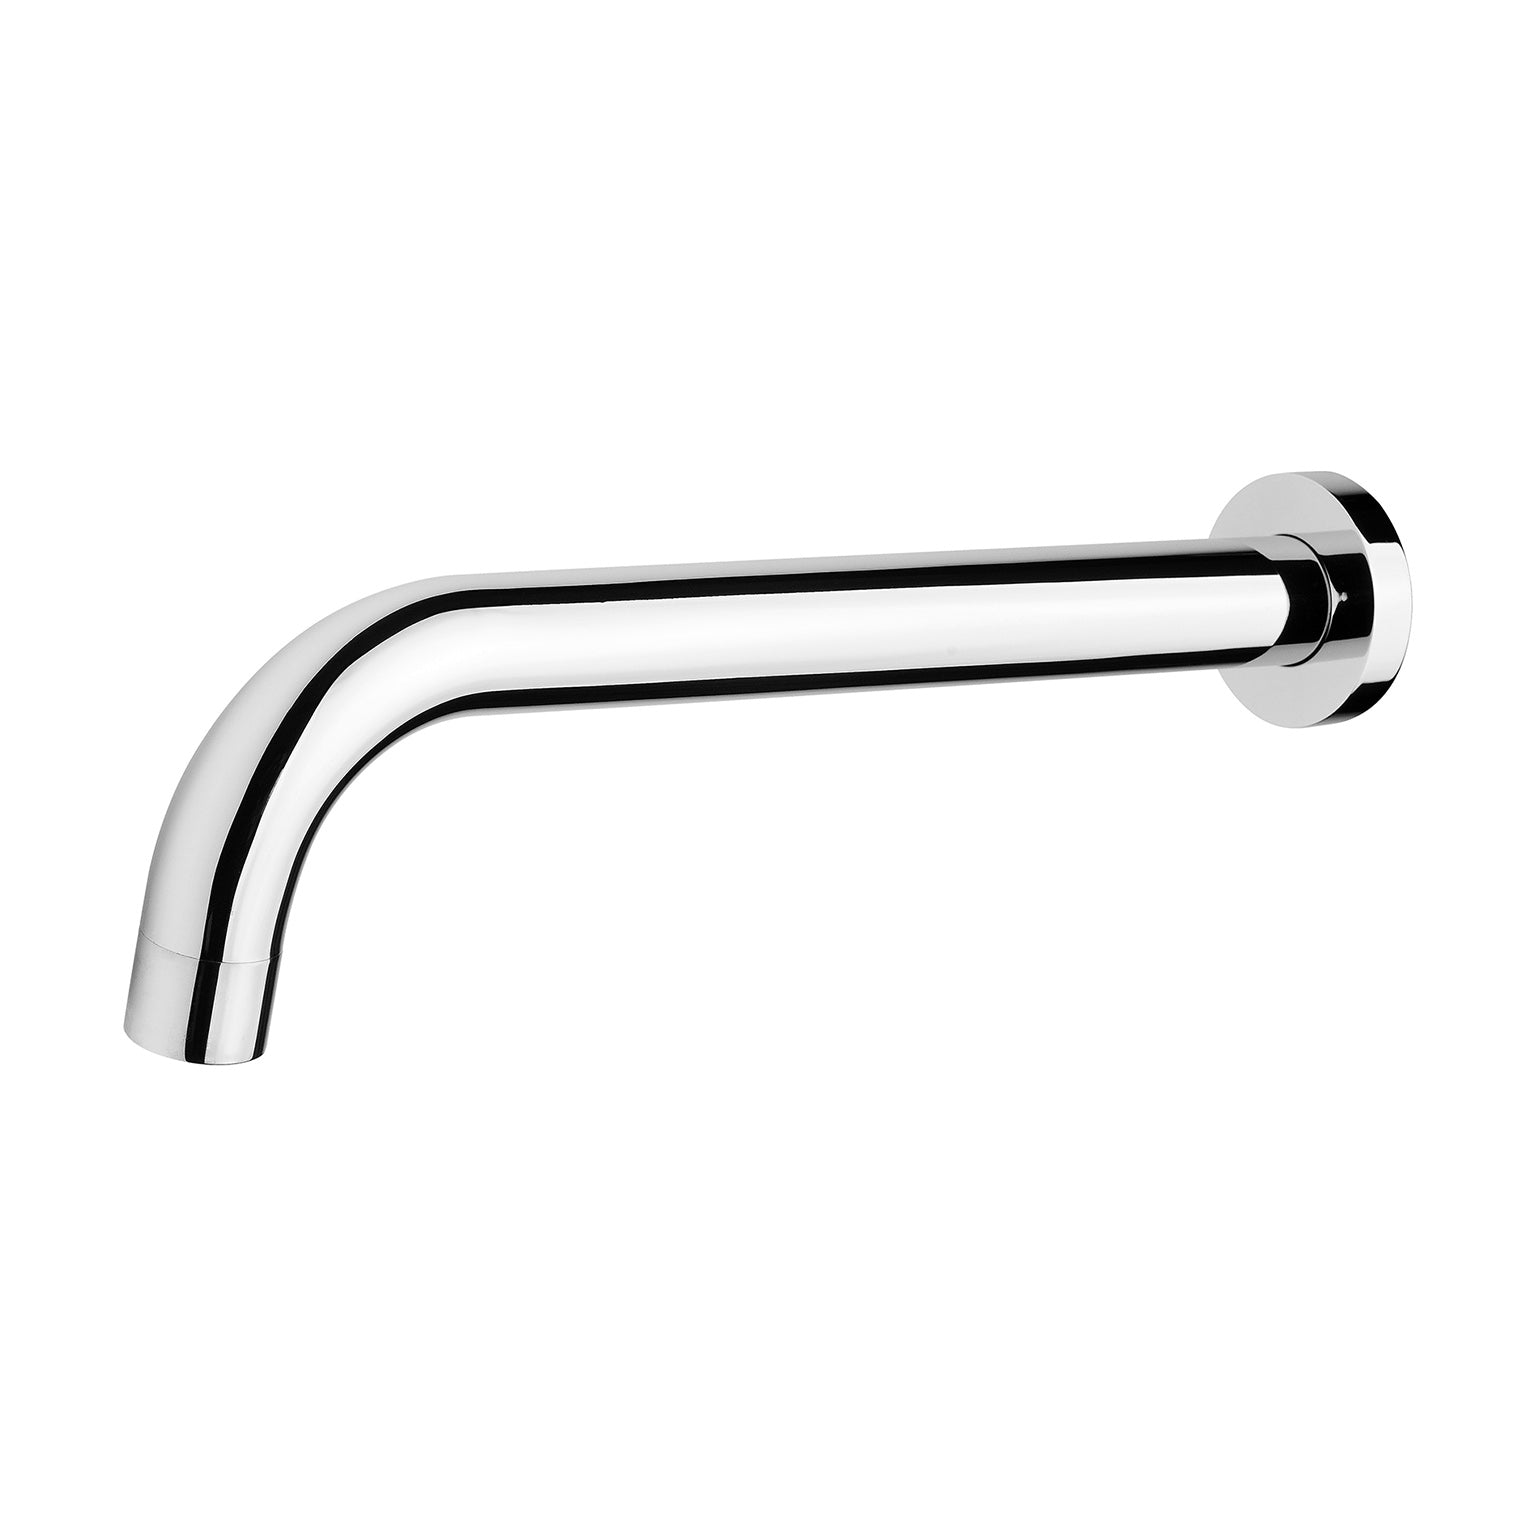 PHOENIX VIVID WALL BASIN OUTLET 250MM CURVED CHROME